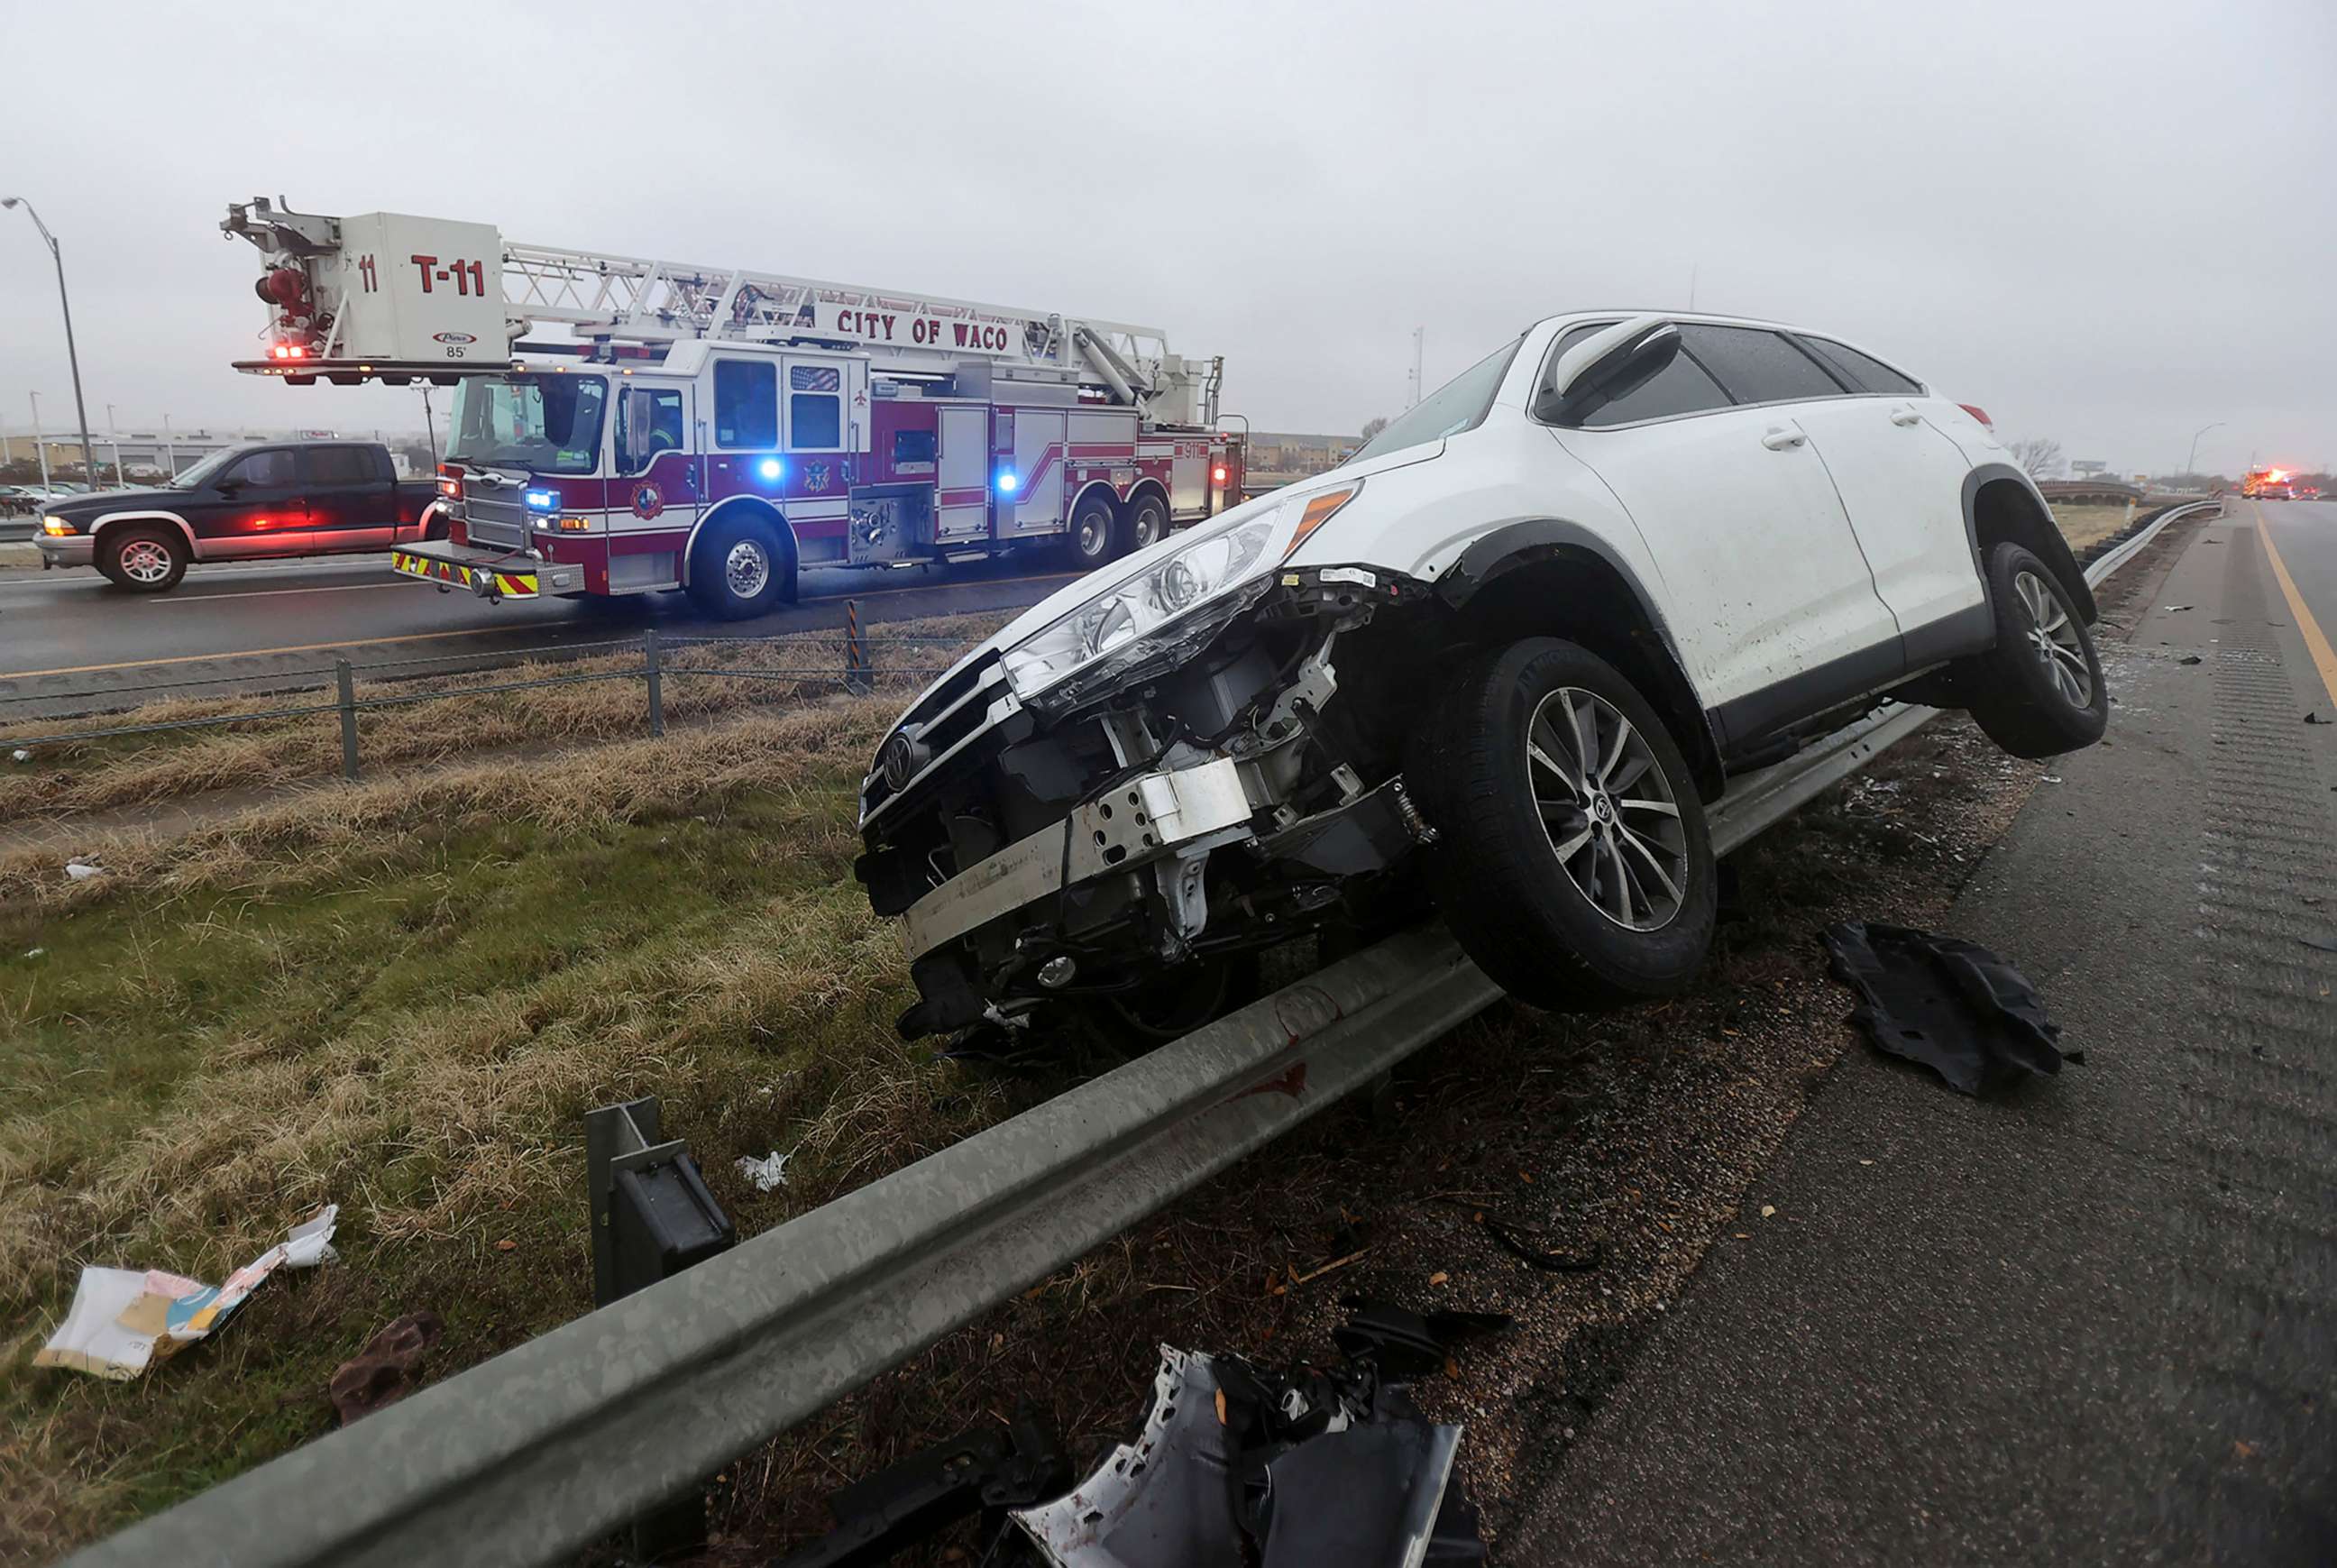 PHOTO: A vehicle rests on a barricade as the driver lost control and slid off Highway 6, Jan. 31, 2023 in Waco, Texas.